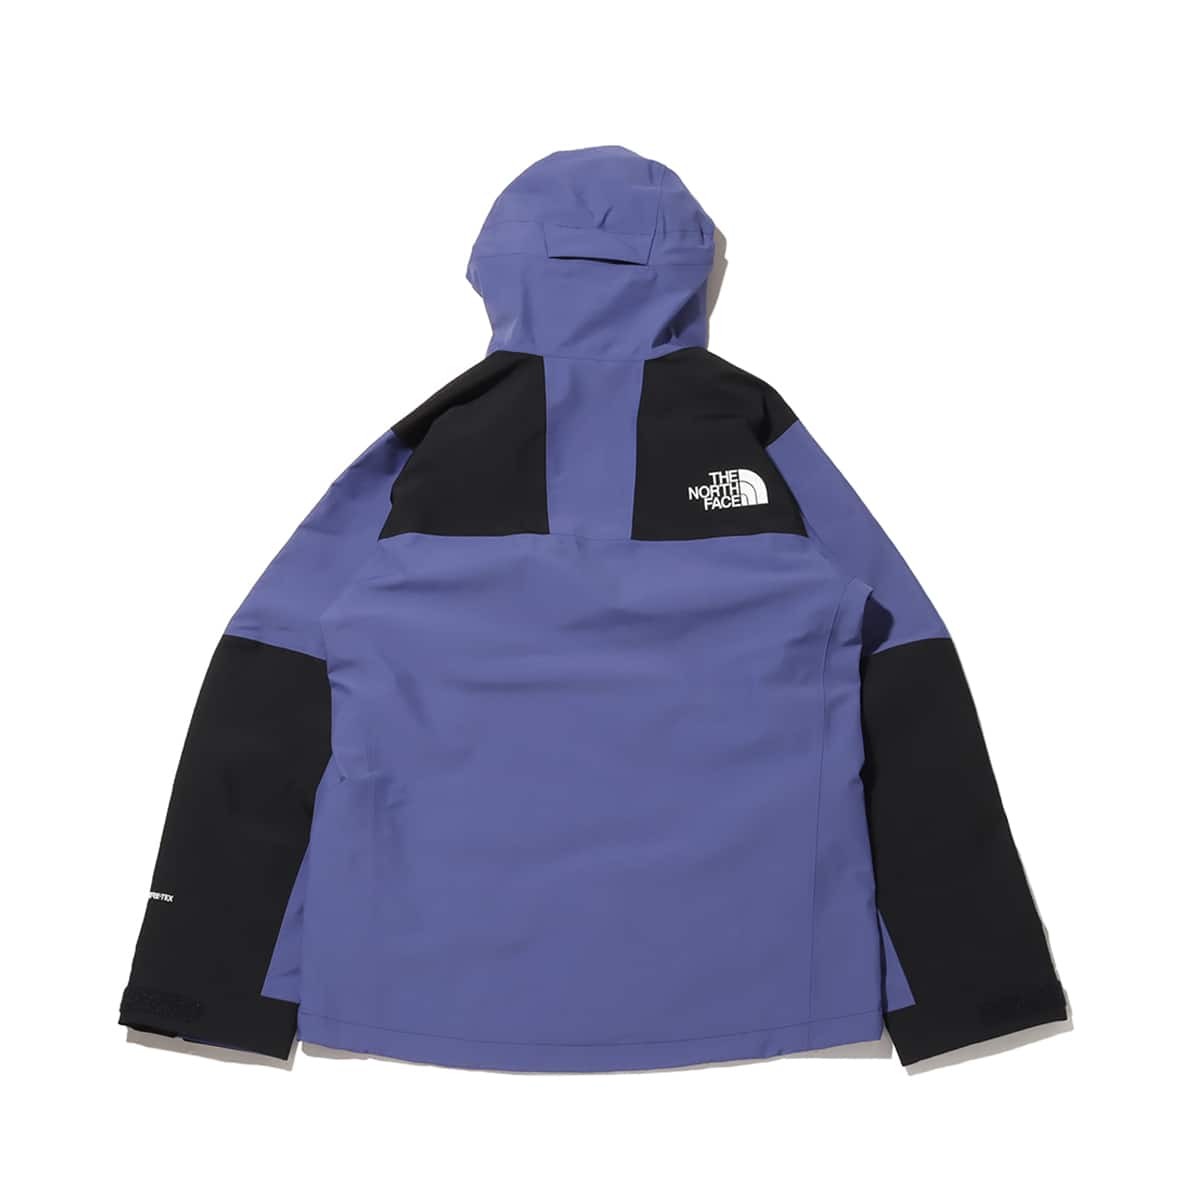 THE NORTH FACE MOUNTAIN JACKET ケイブブルー